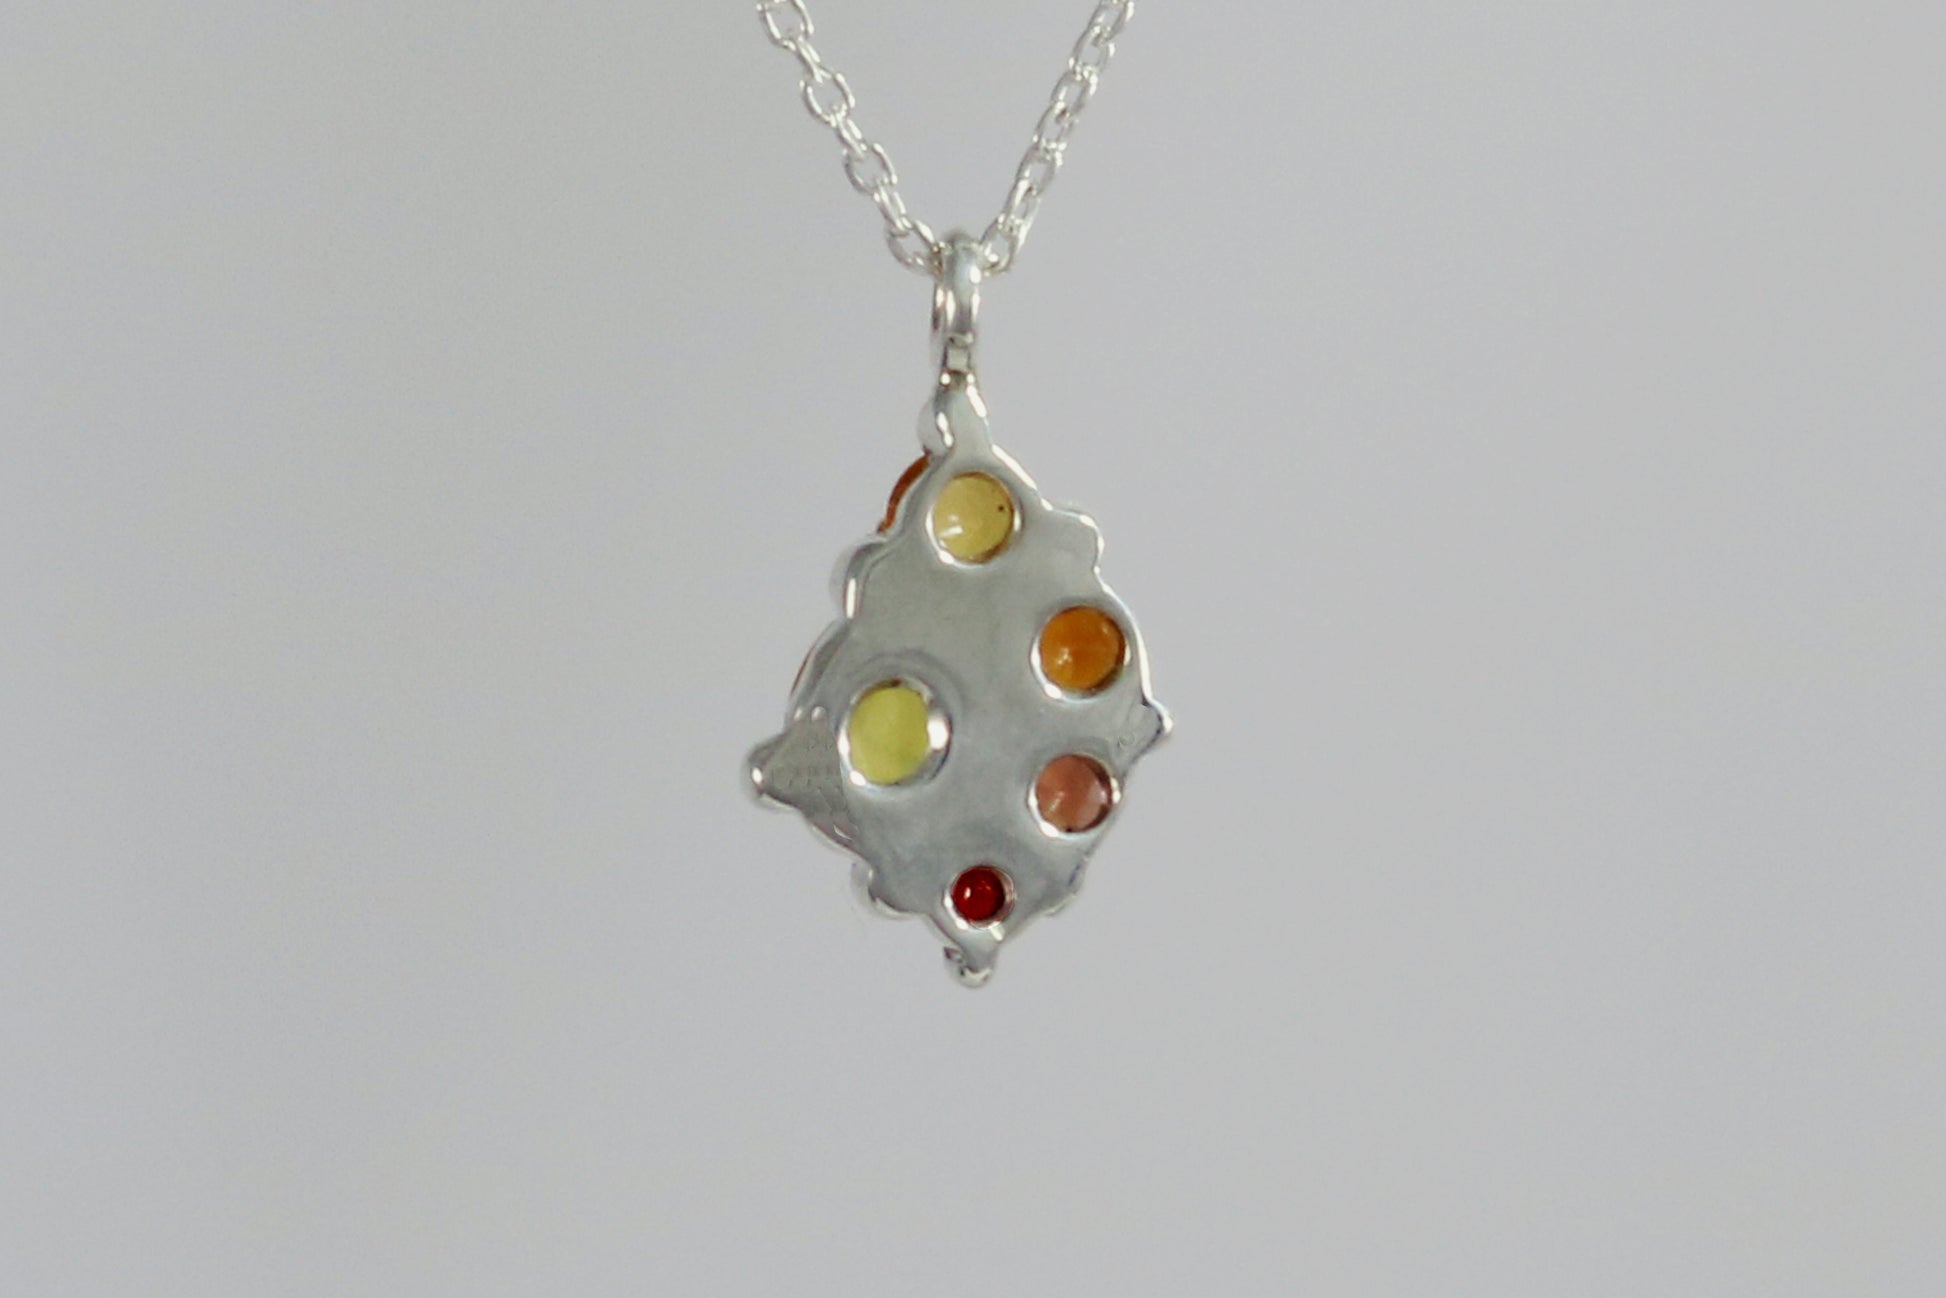 A sterling silver cluster pendant of natural gemstones in a yellow to red gradient on a sterling silver chain.